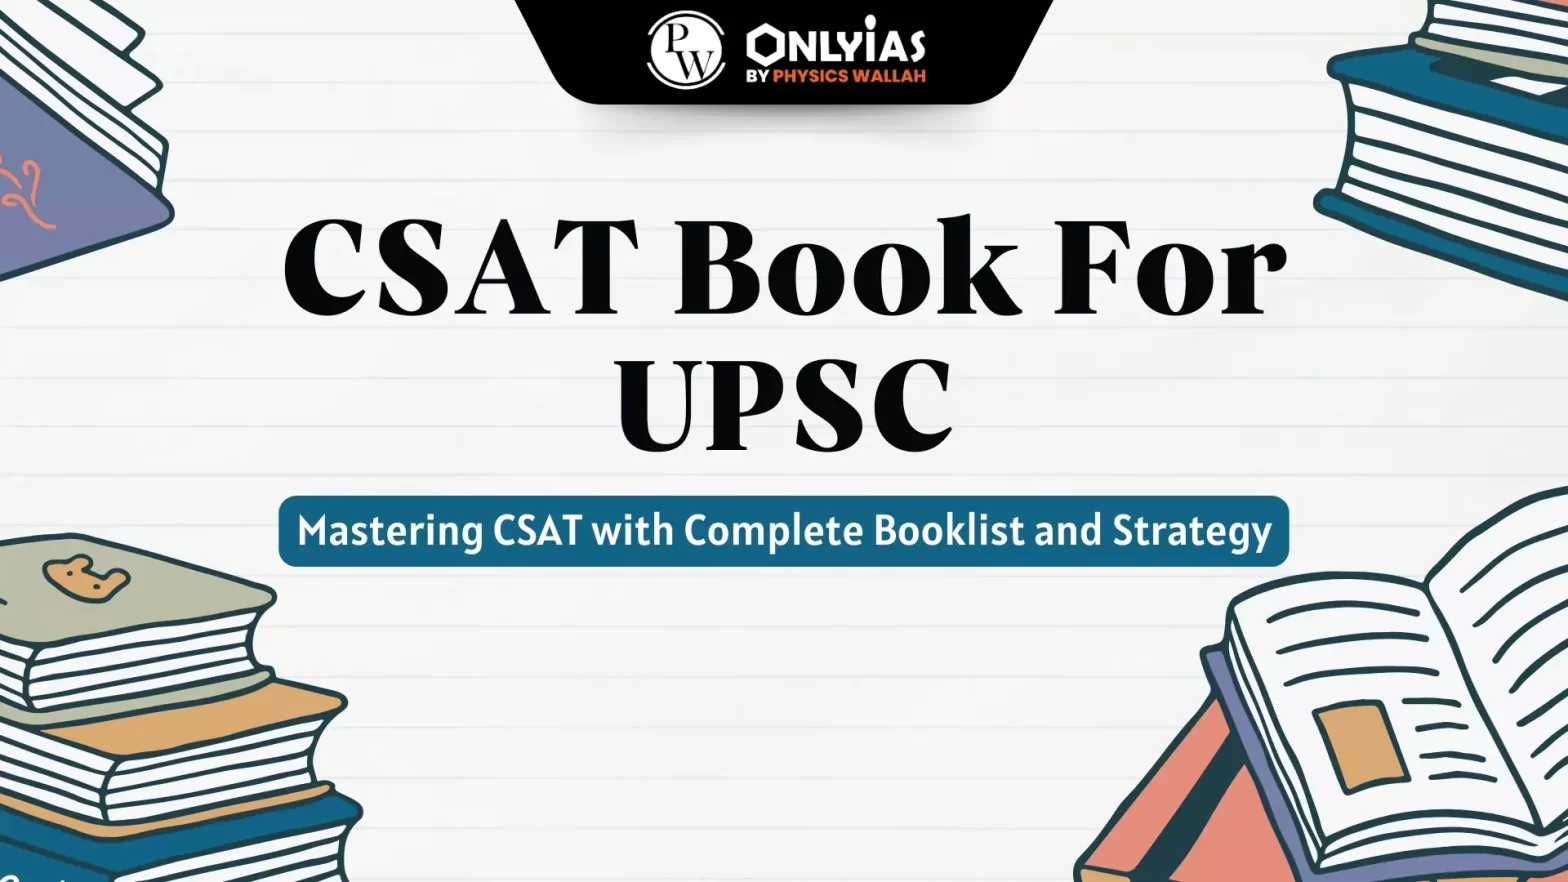 CSAT Book For UPSC: Mastering CSAT with Complete Booklist and Strategy